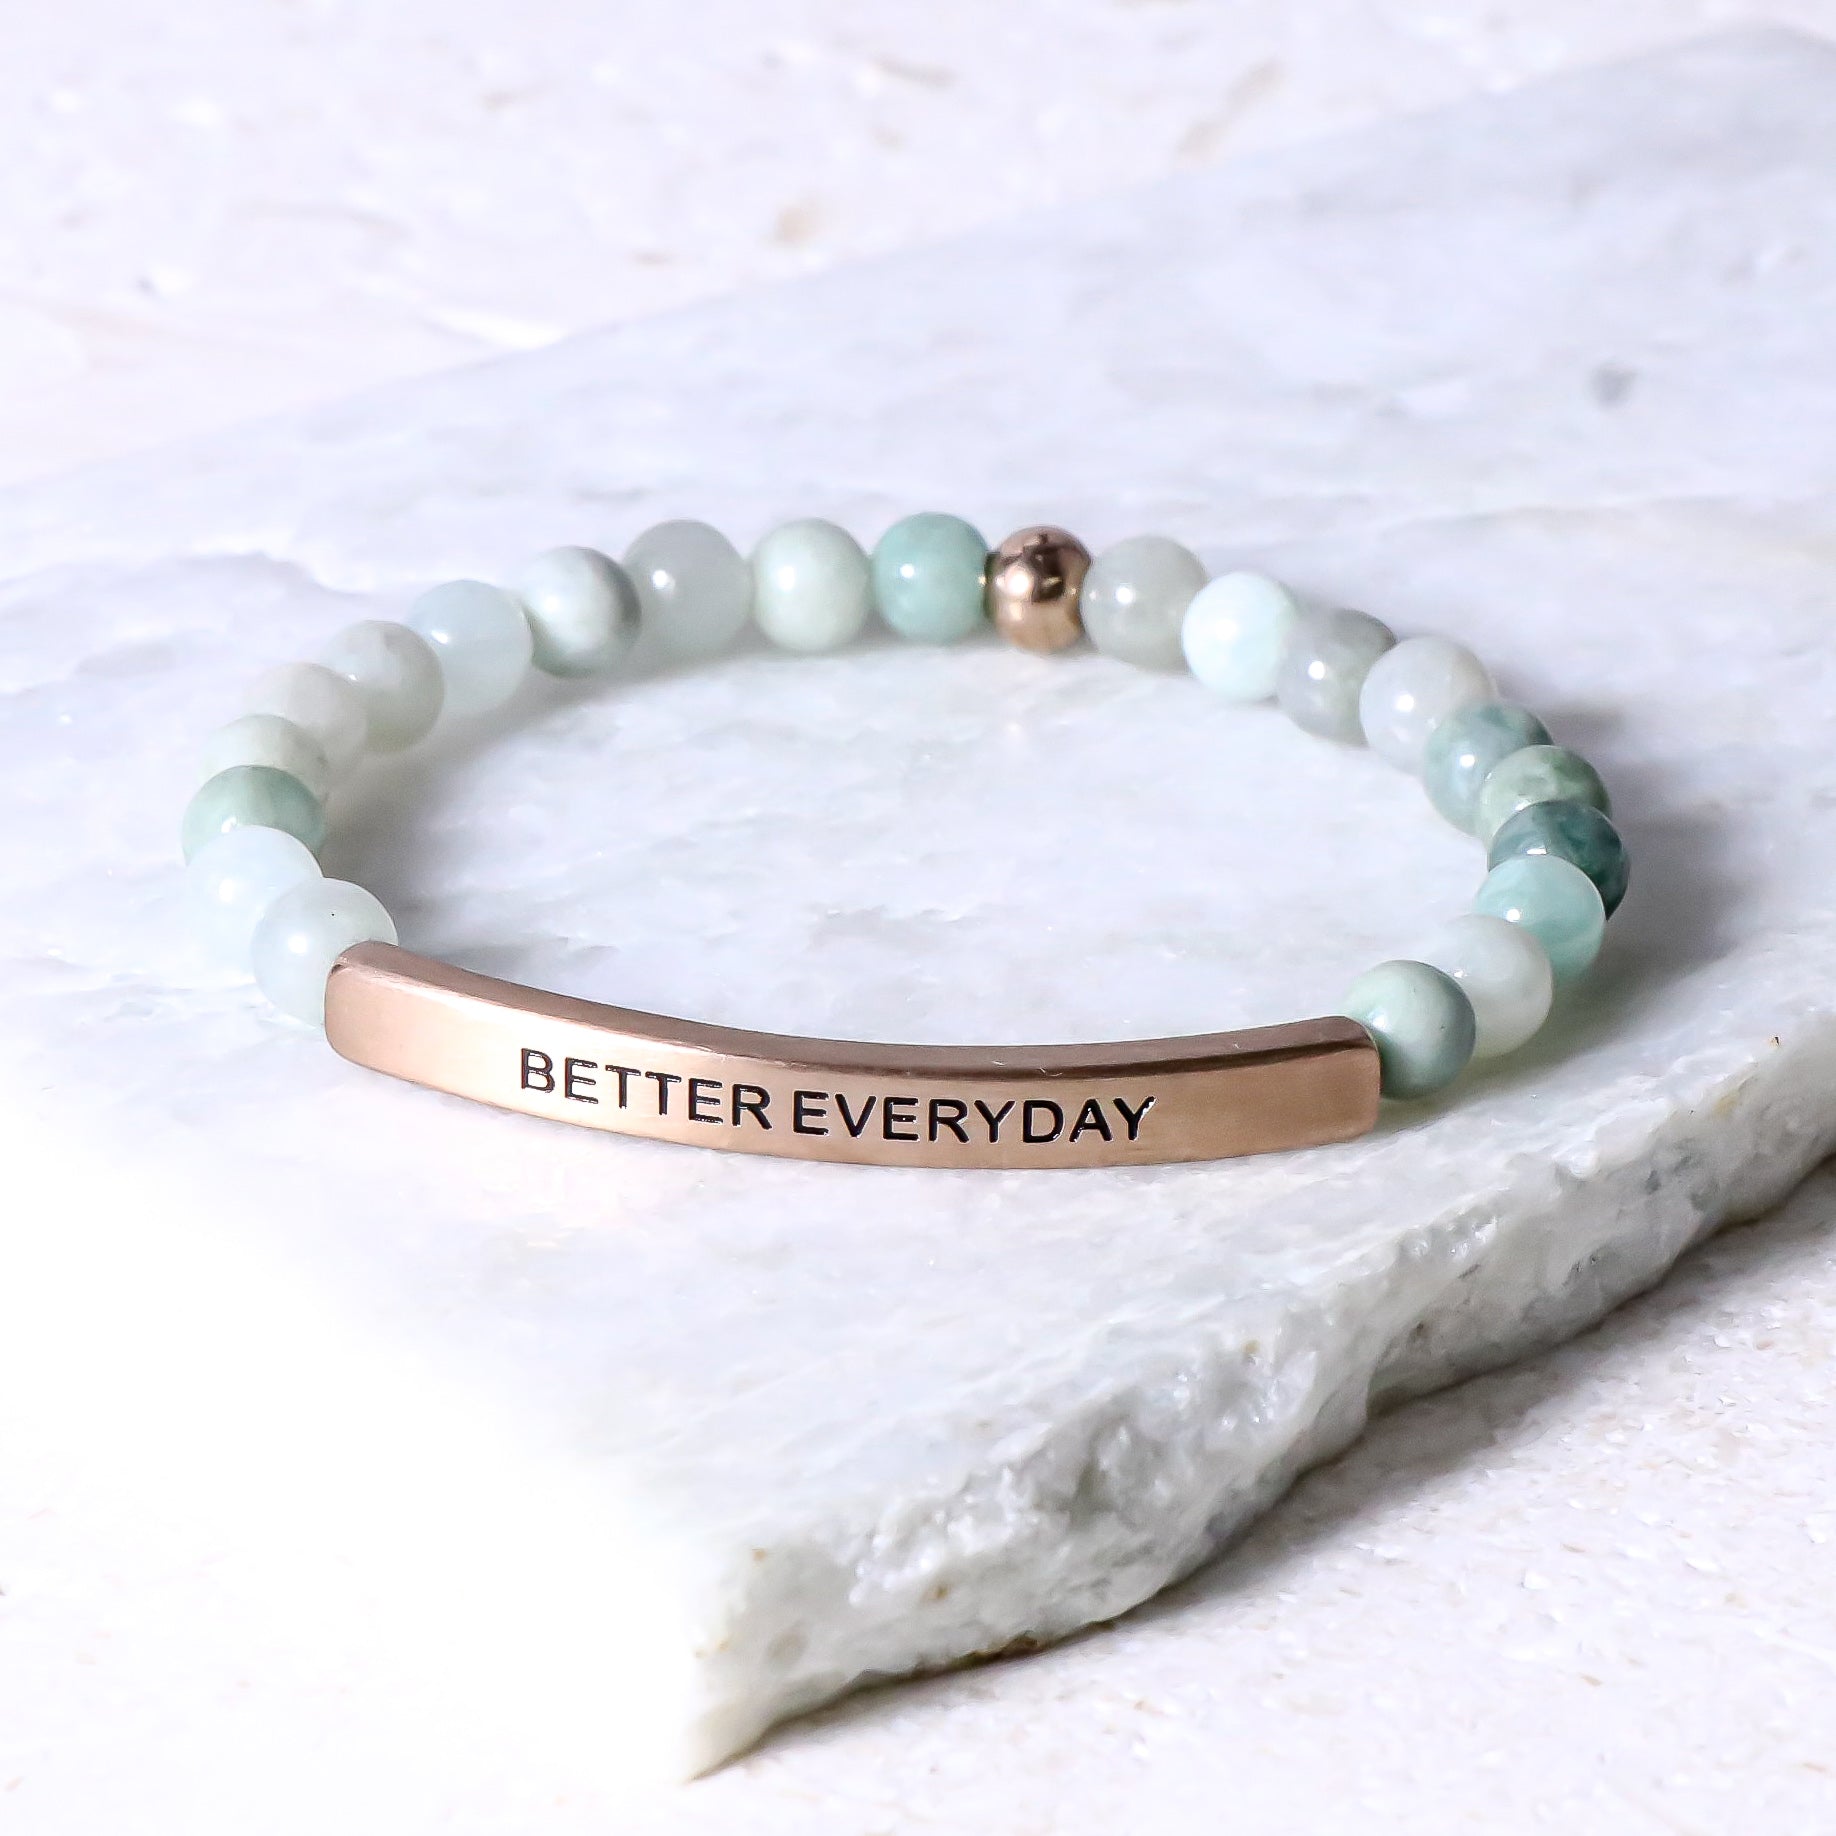 BETTER EVERYDAY - Inspiration Co.